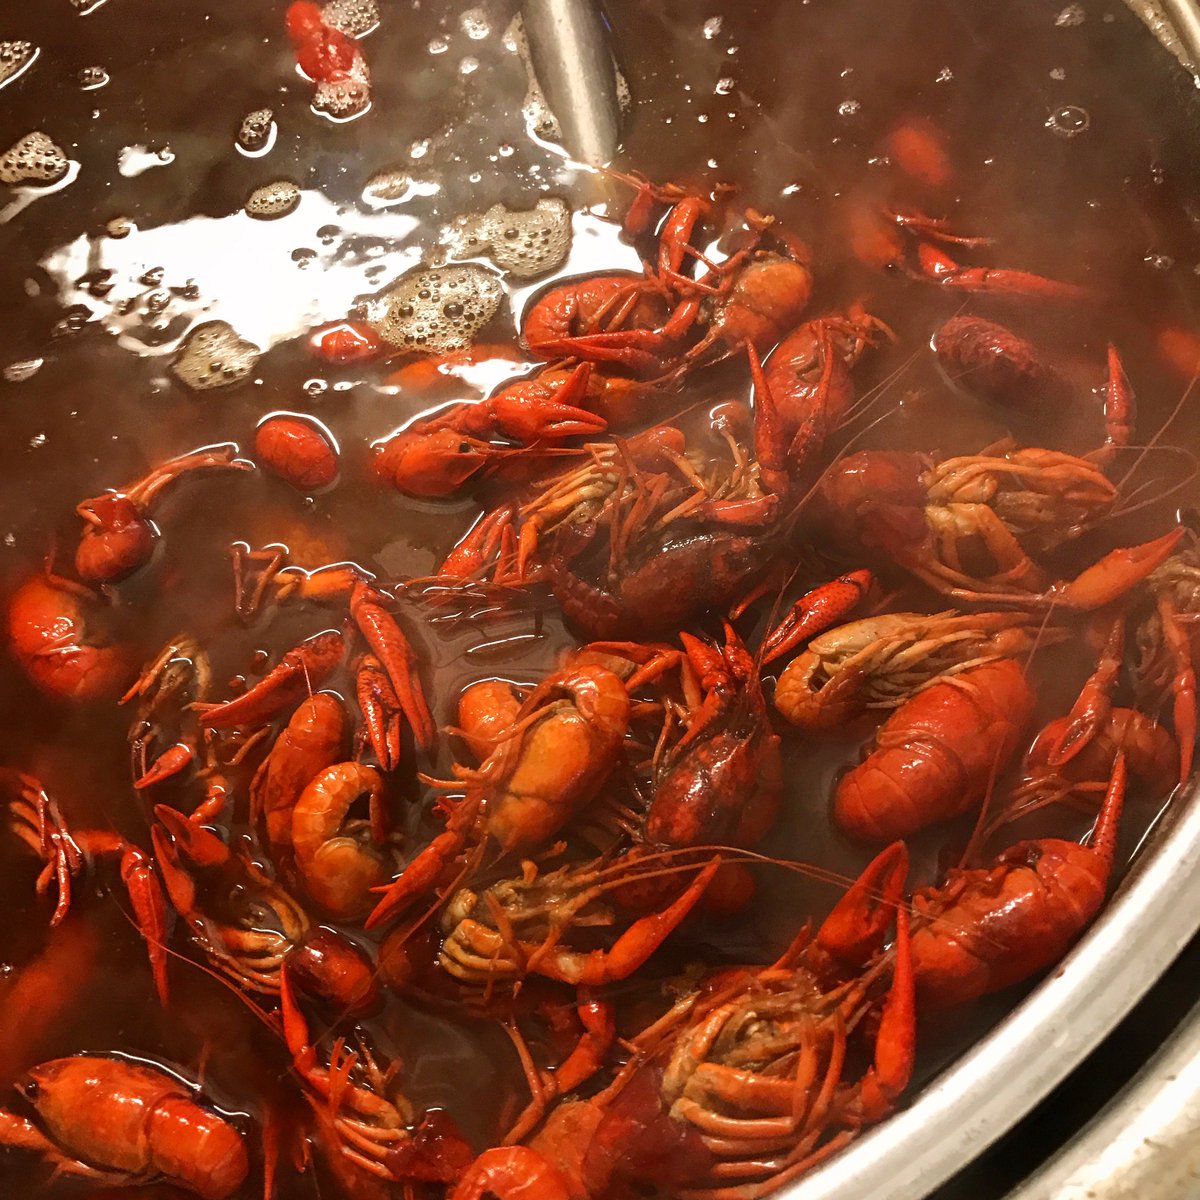 Warm weather & #crawfish in January?! We will take it!! Y’all come get a few lbs for #lunch! #greatfood #goodtimes #livemisic